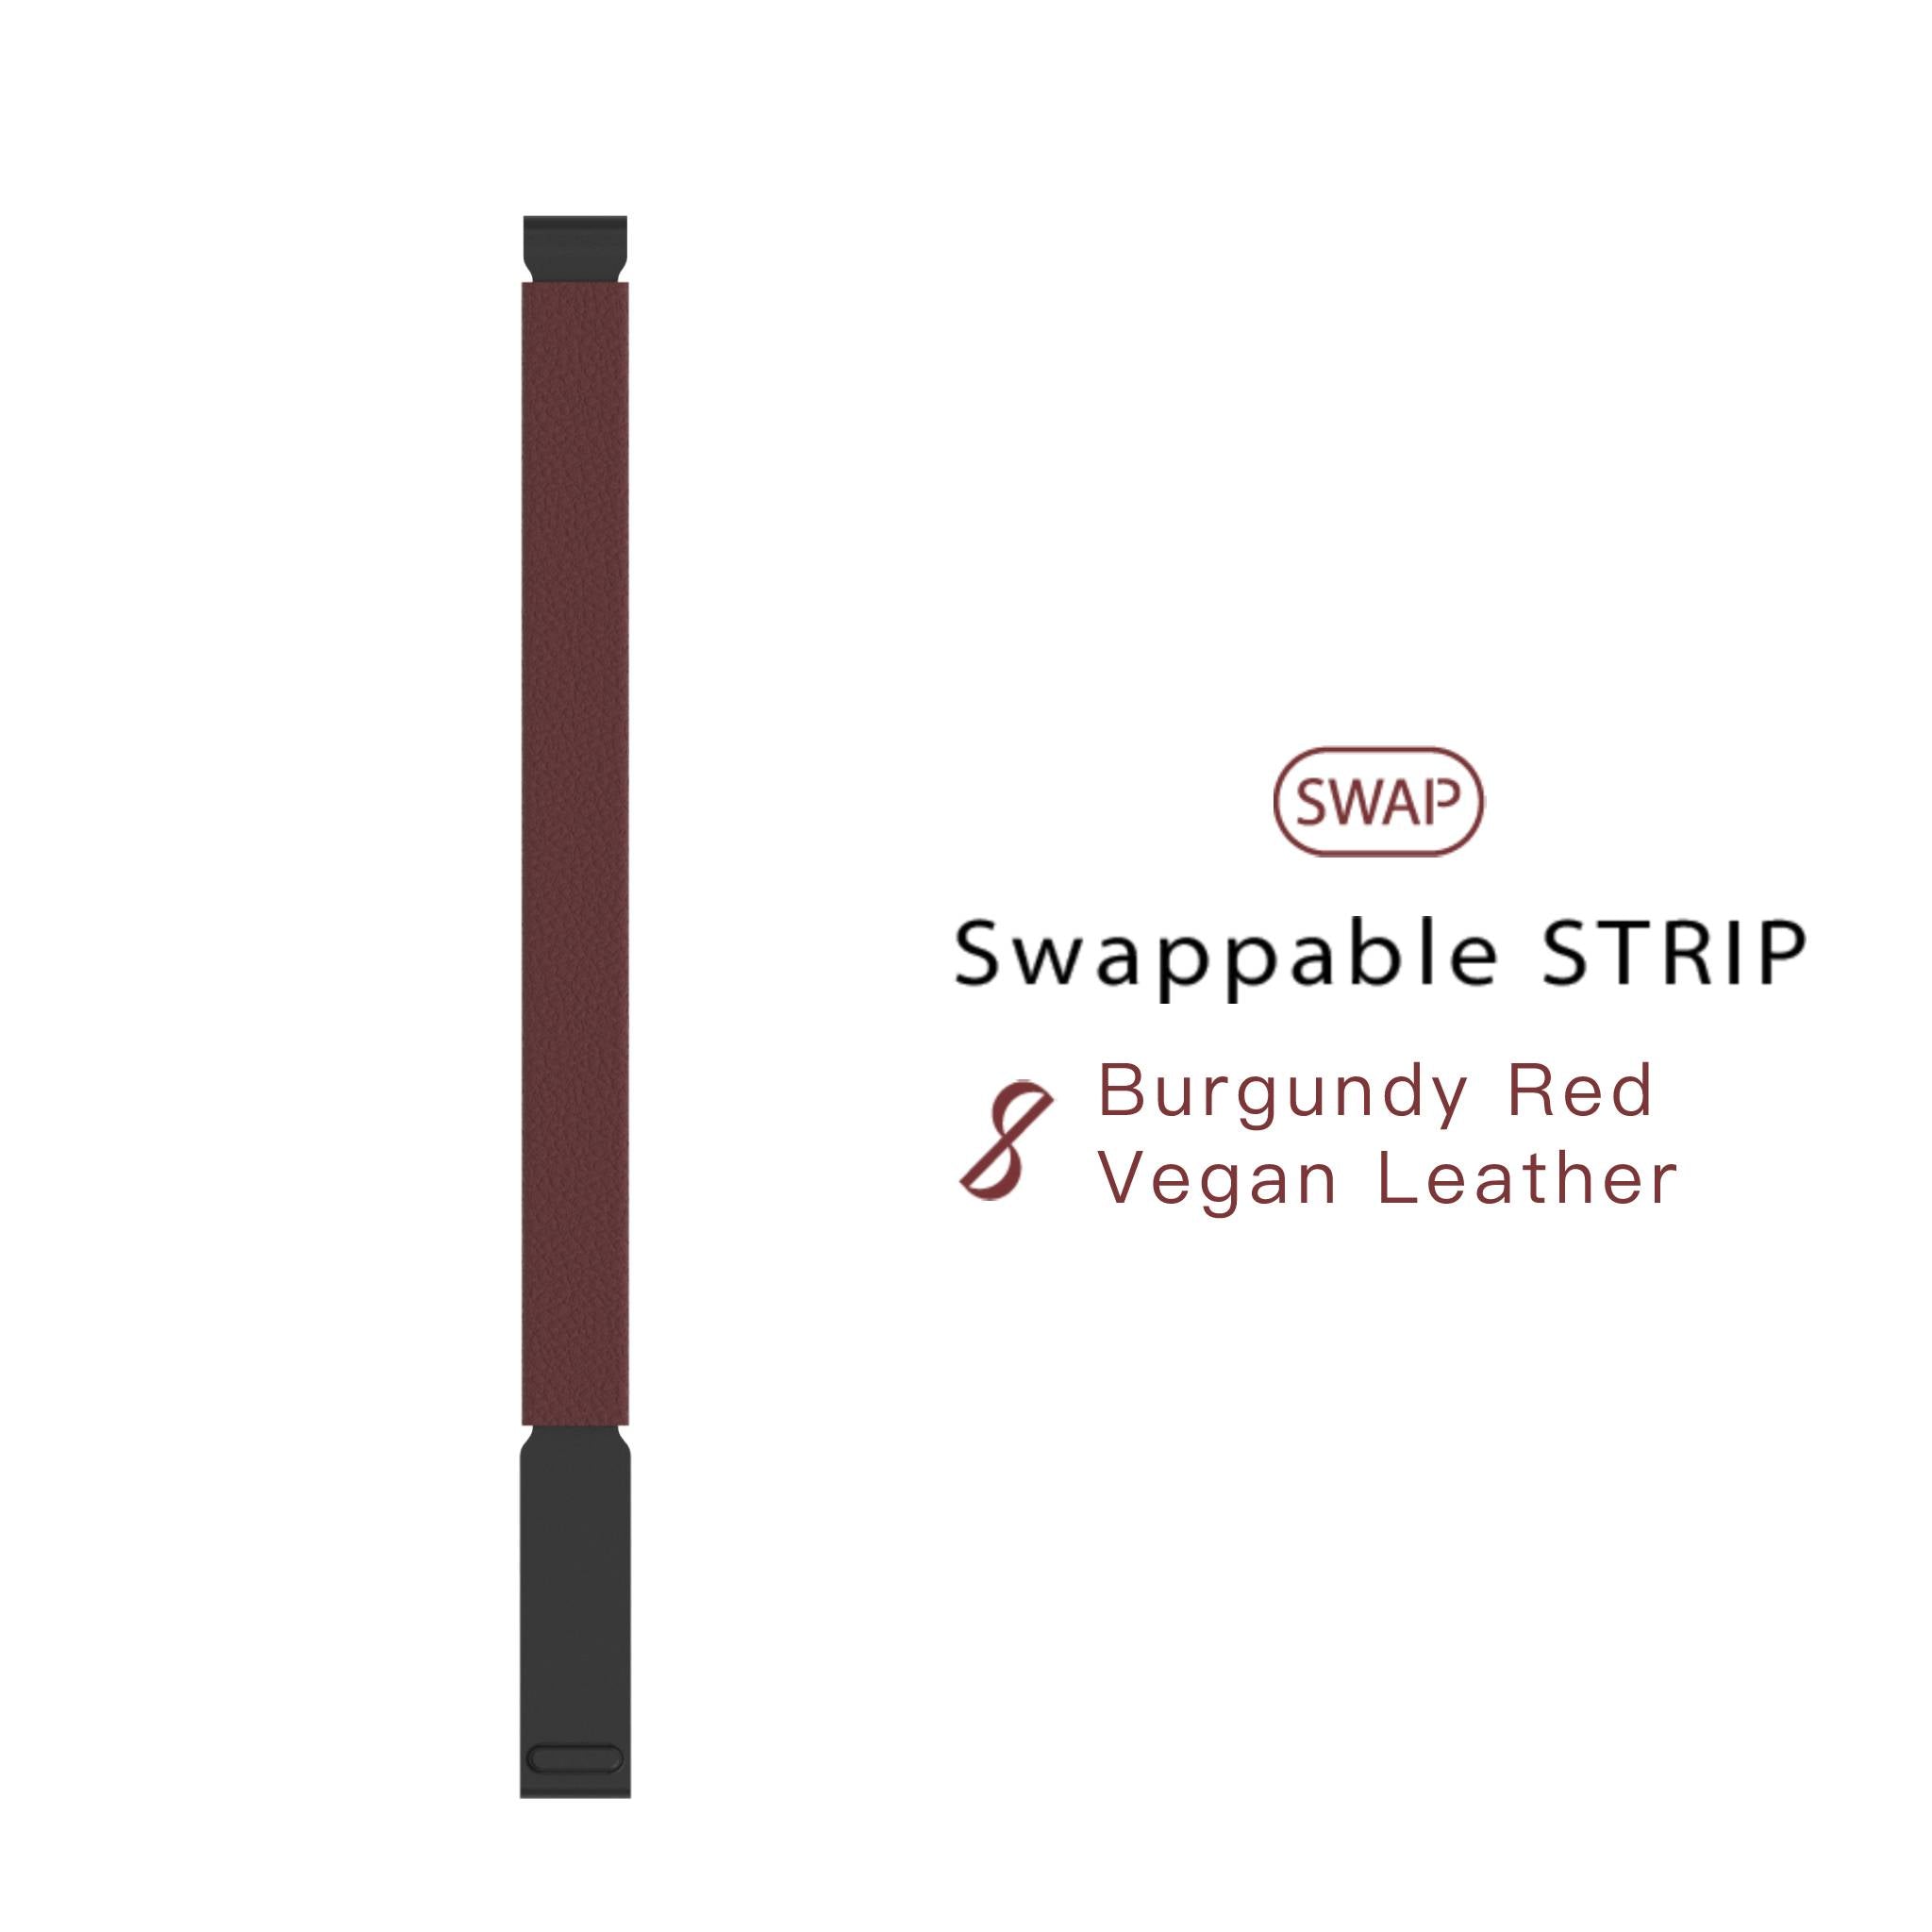 Swappable Strip: Burgundy Red Vegan Leather